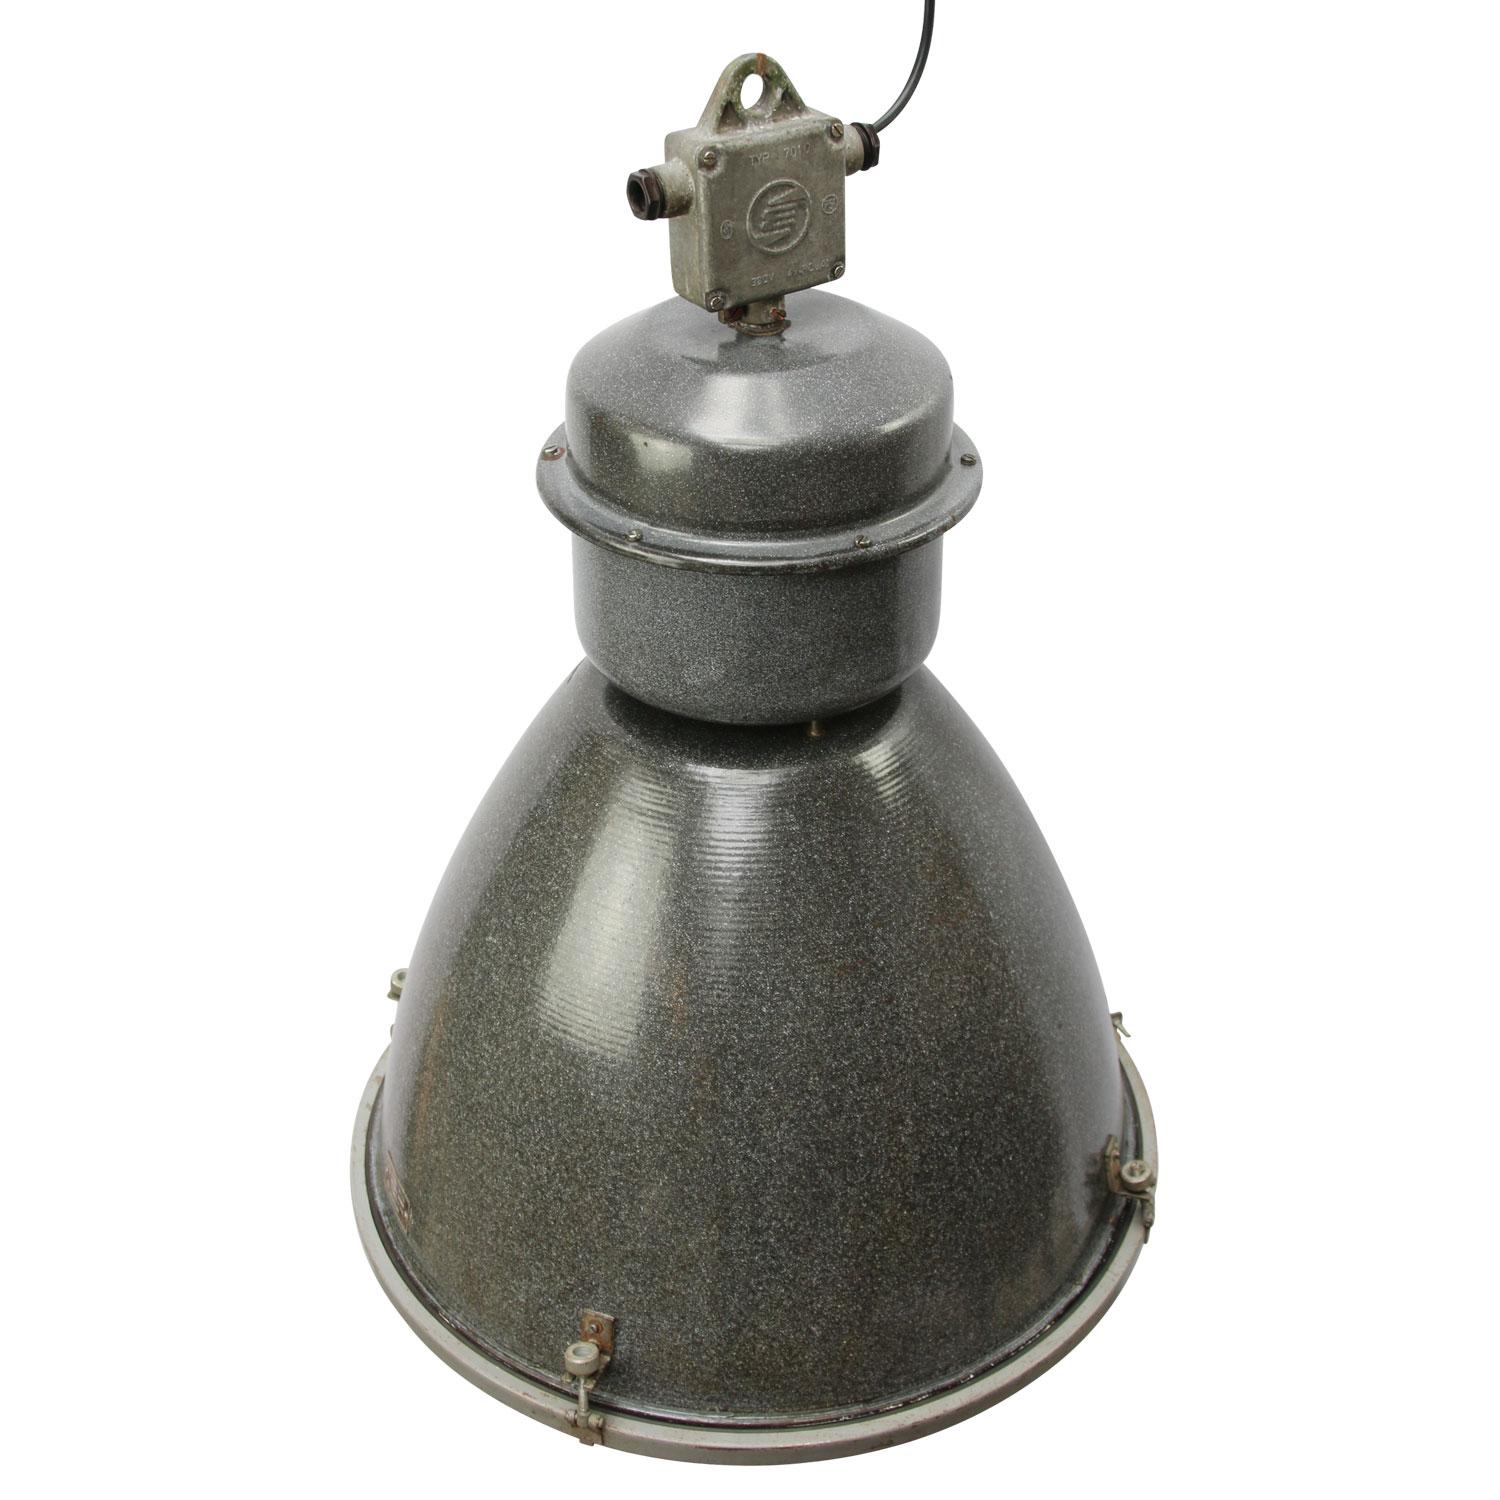 Big industrial lamp incl. glass
speckled dark/grey enamel white interior
clear glass

Weight: 12.00 kg / 26.5 lb

Priced per individual item. All lamps have been made suitable by international standards for incandescent light bulbs, energy-efficient